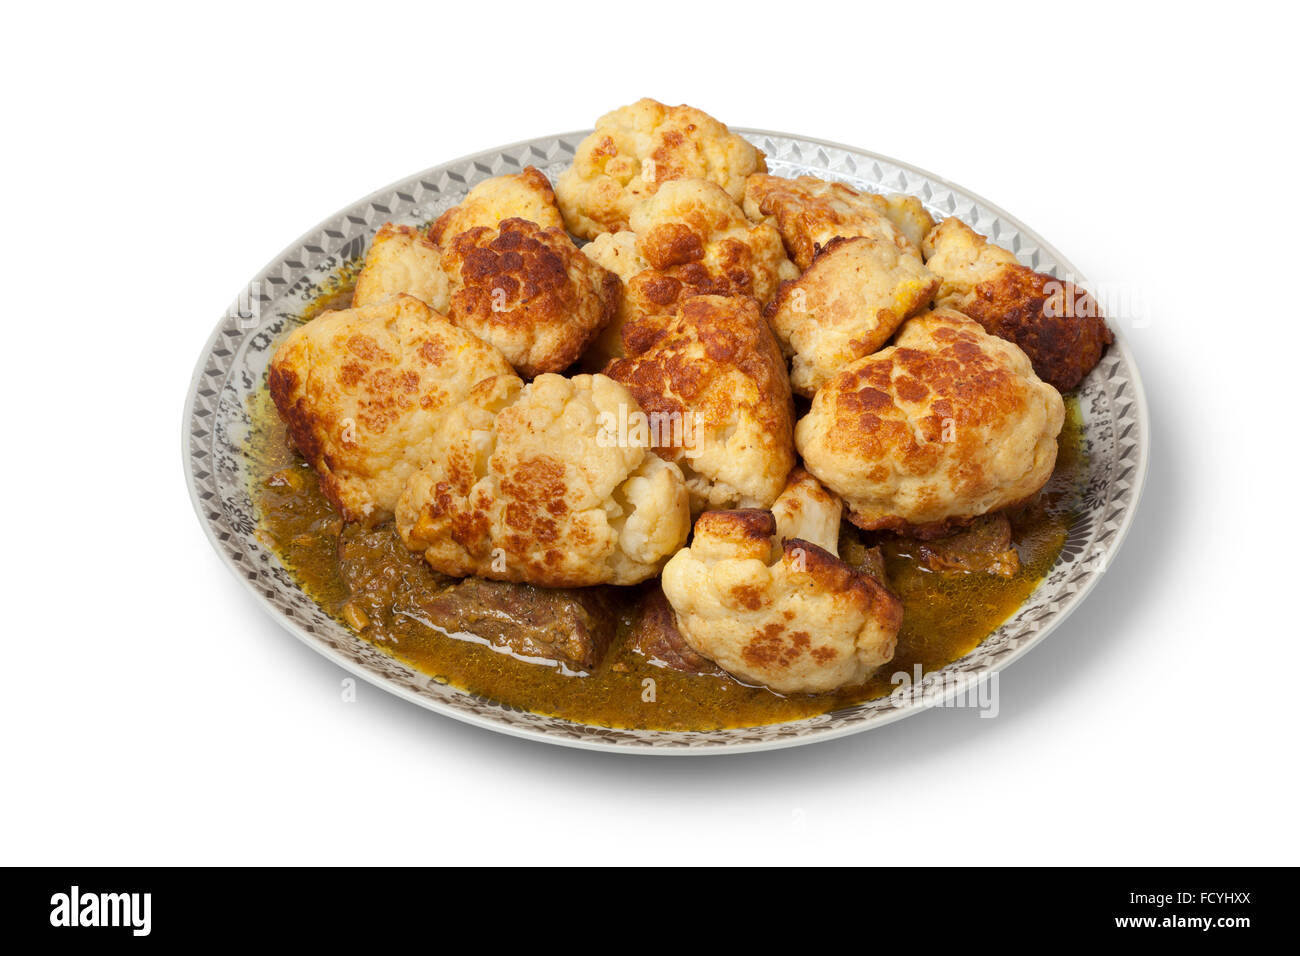 Moroccan traditional deep fried cauliflower with beef and sauce on a dish on white background Stock Photo